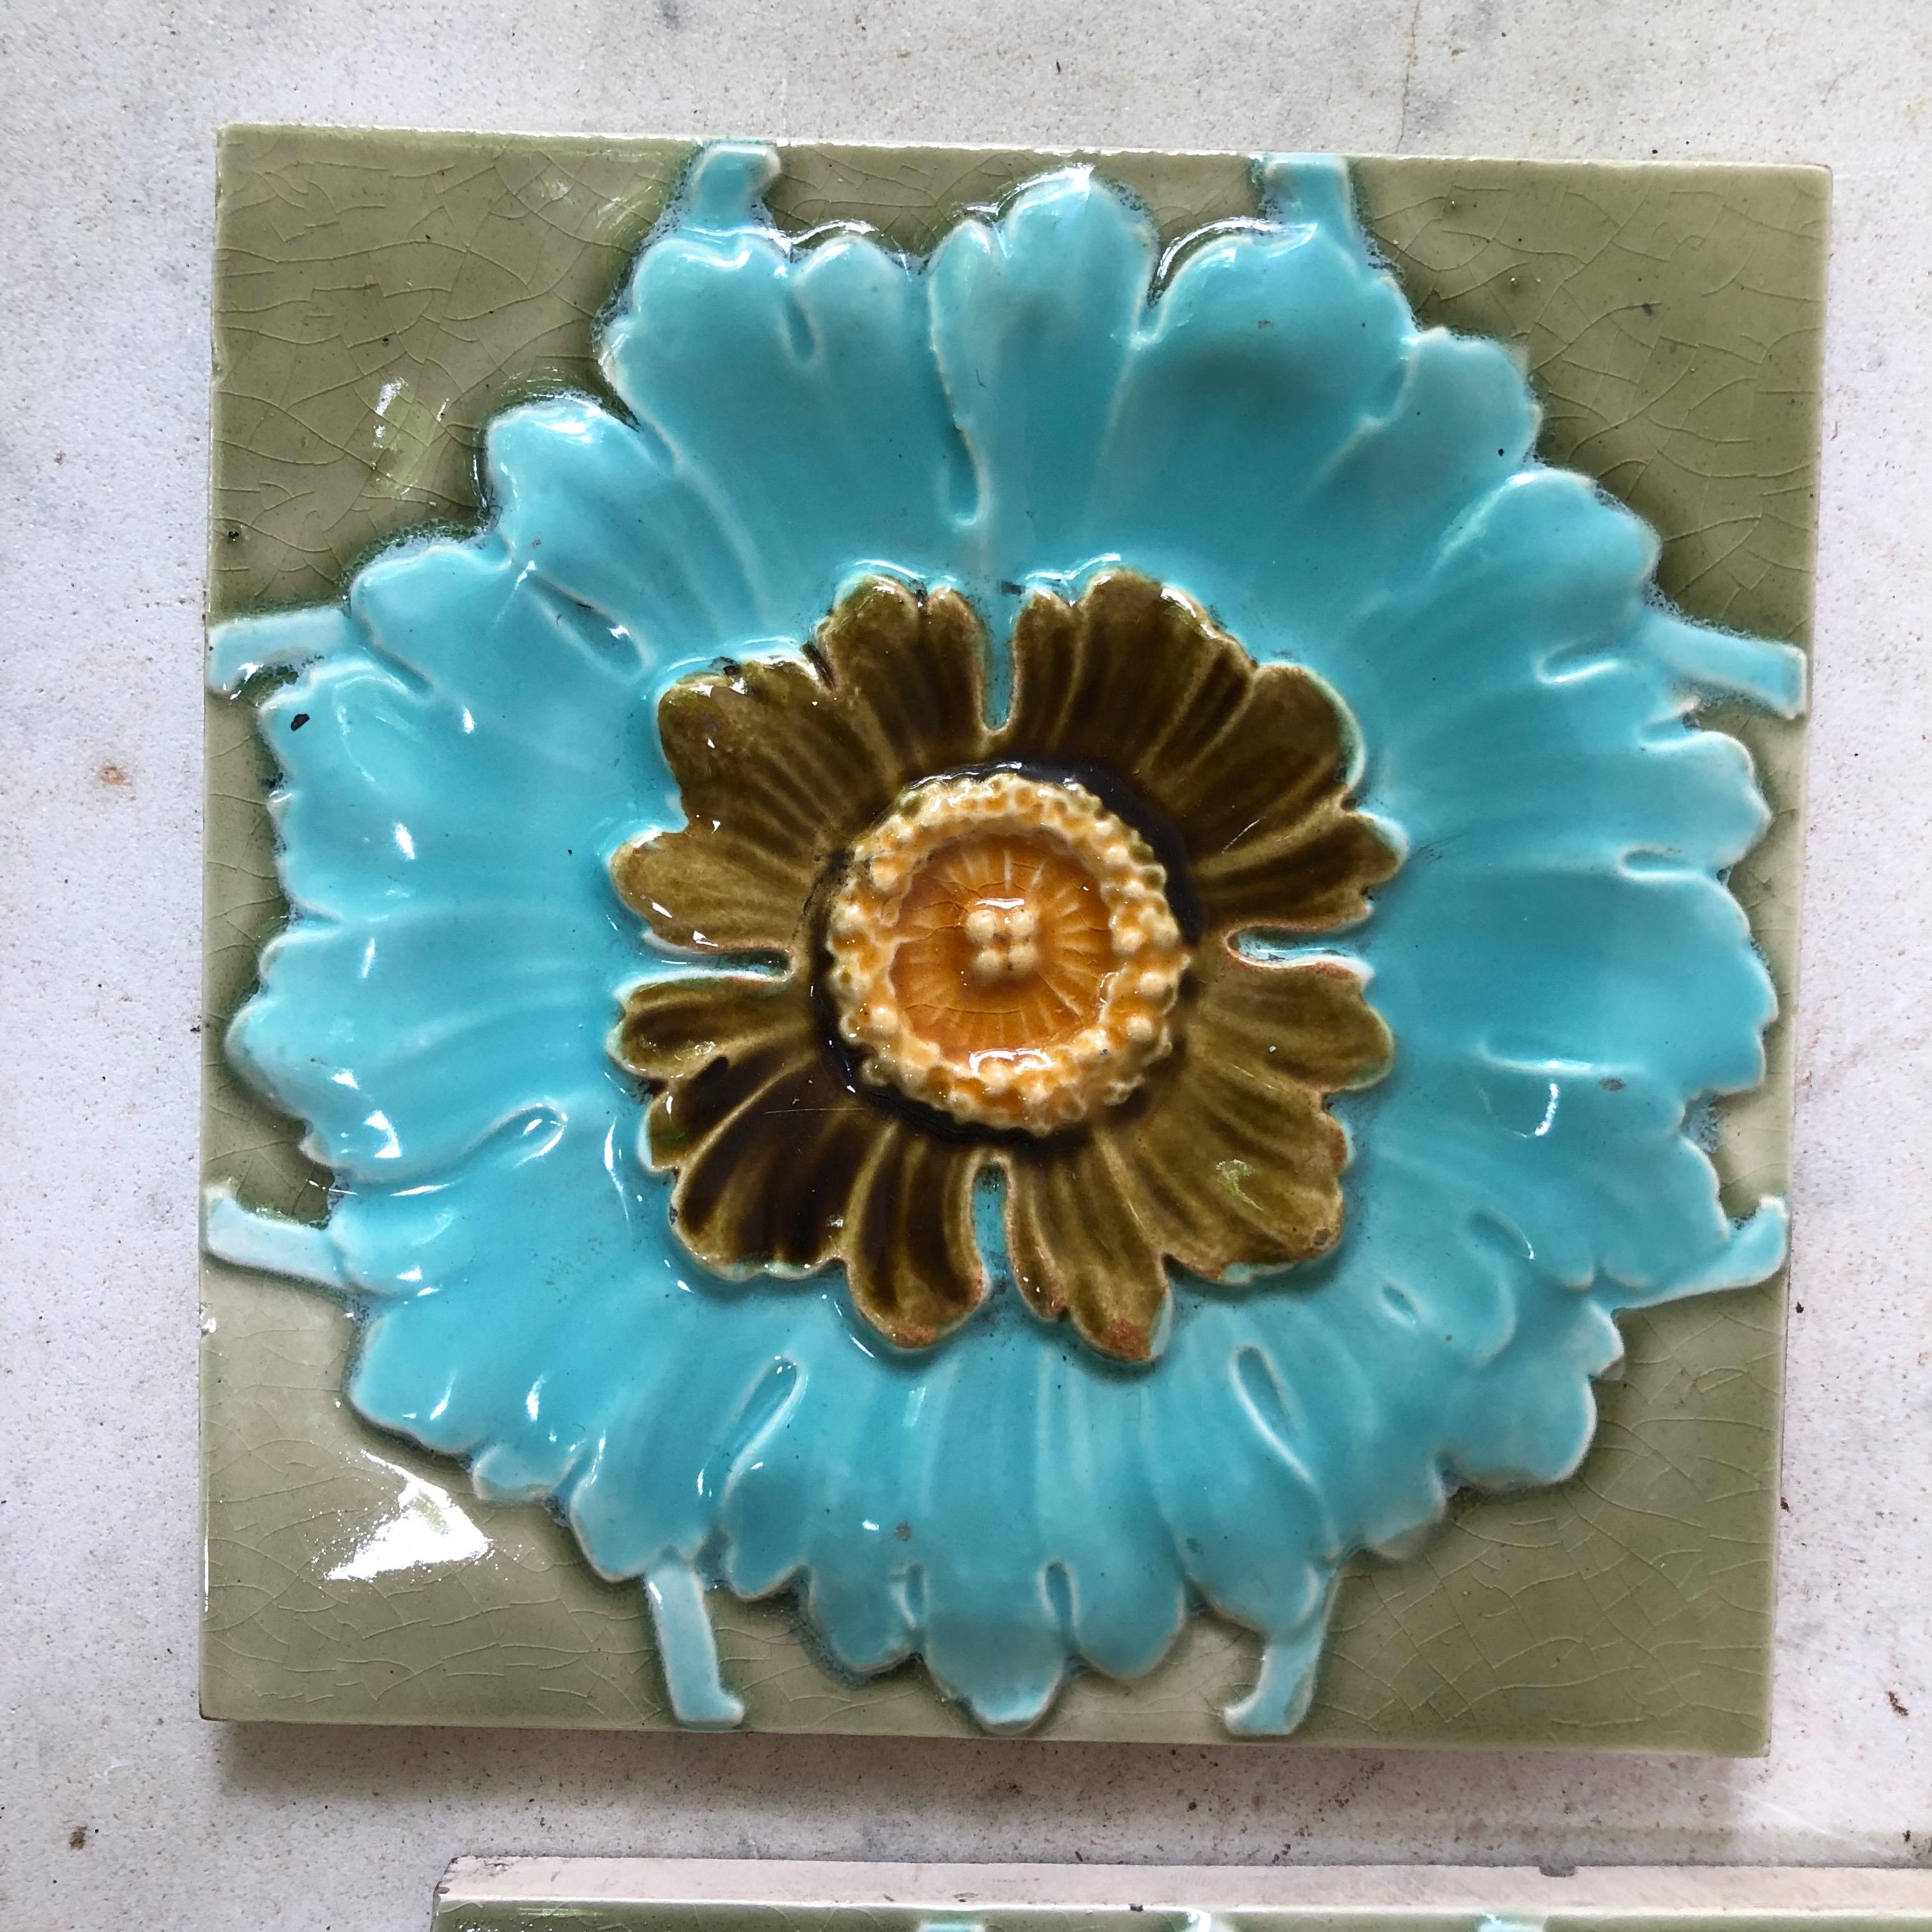 French Majolica flowers tile, circa 1890.
6' by 6